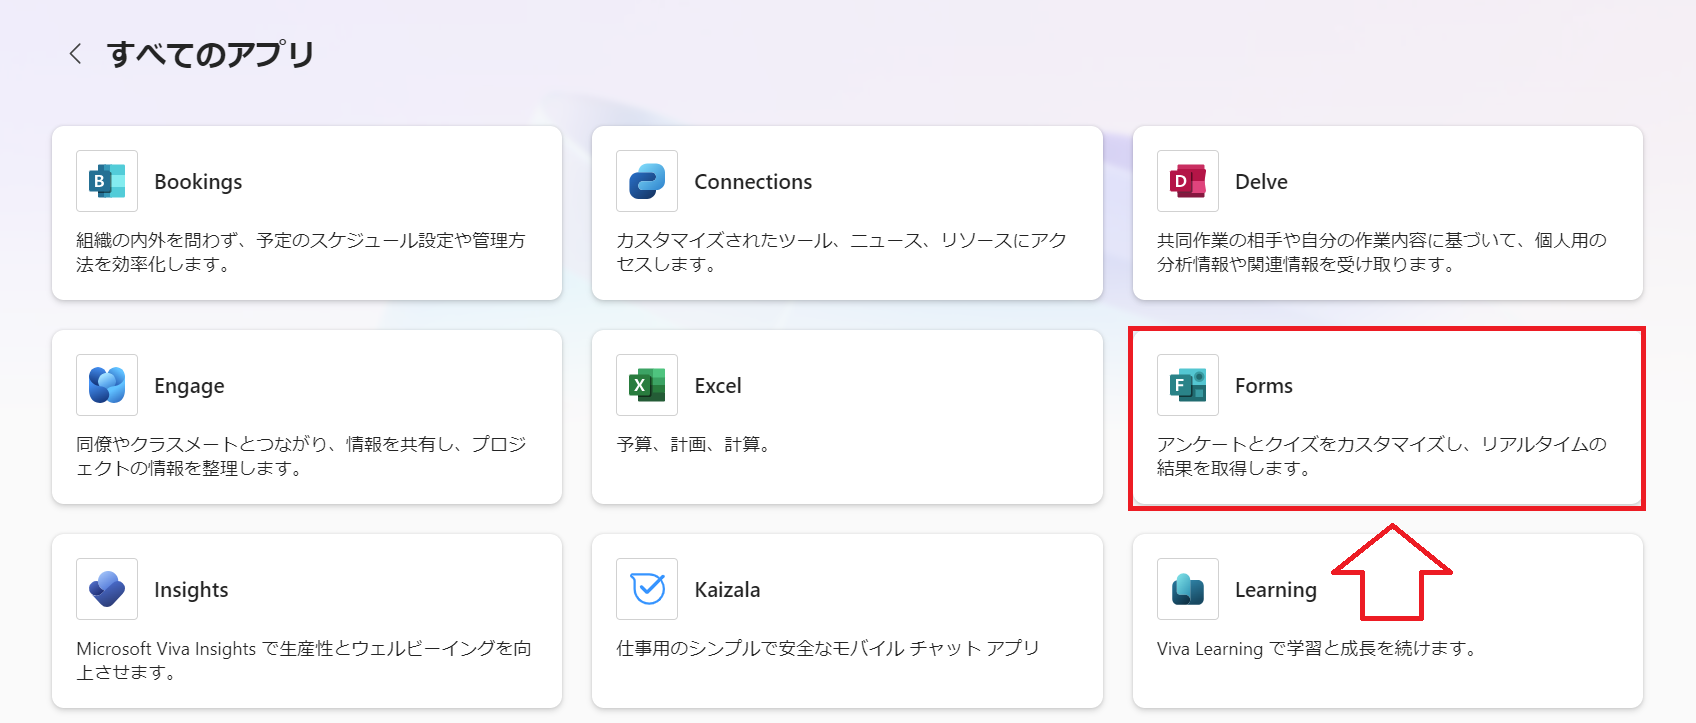 Forms：アプリ一覧からFormsをクリック